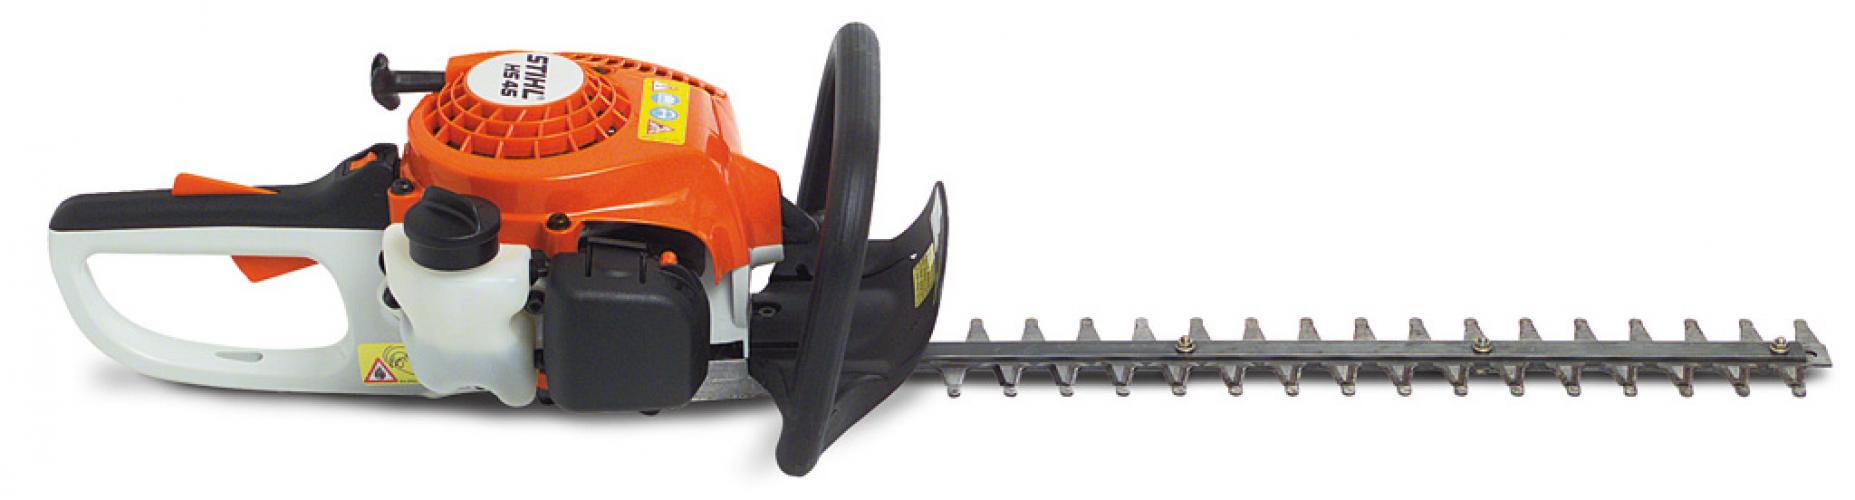 HS 45 18" Gas Hedge Trimmer